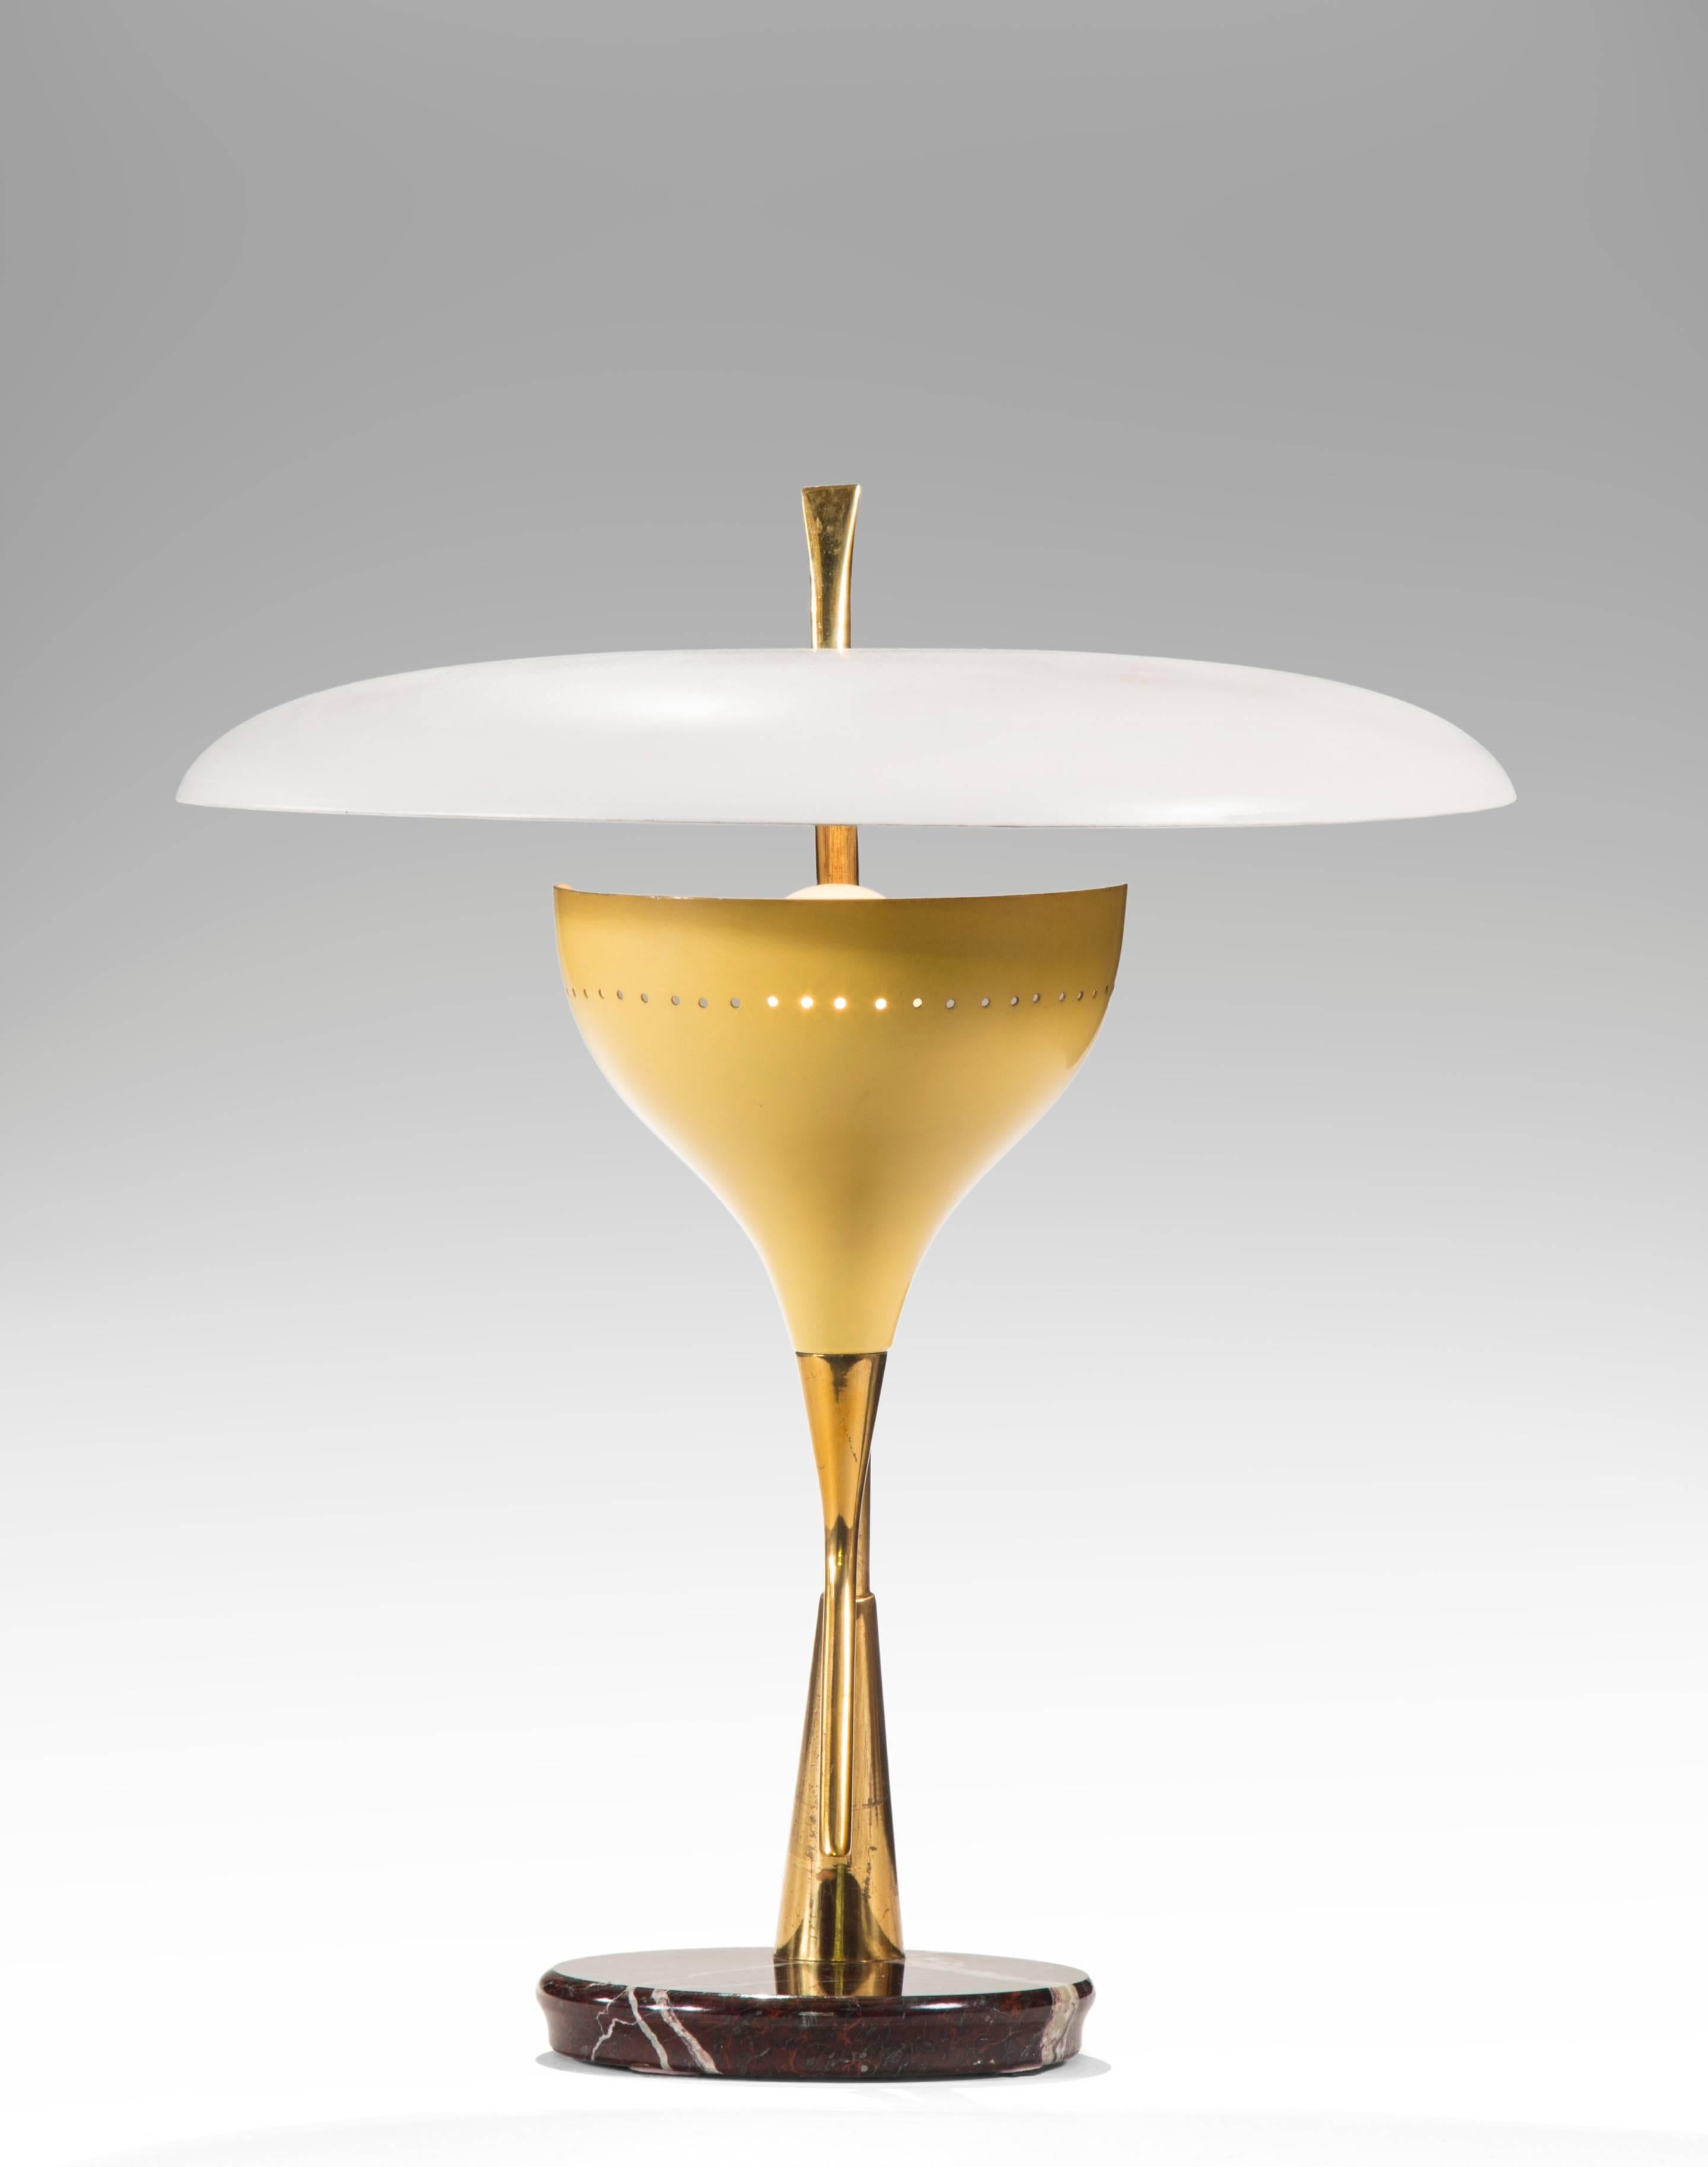 This choice lamp defines mid century Italian design at its best. The circular white shade above a pale yellow light holder both raised on angled brass supports, with a reverse beveled circular marble base. All materials of very good quality